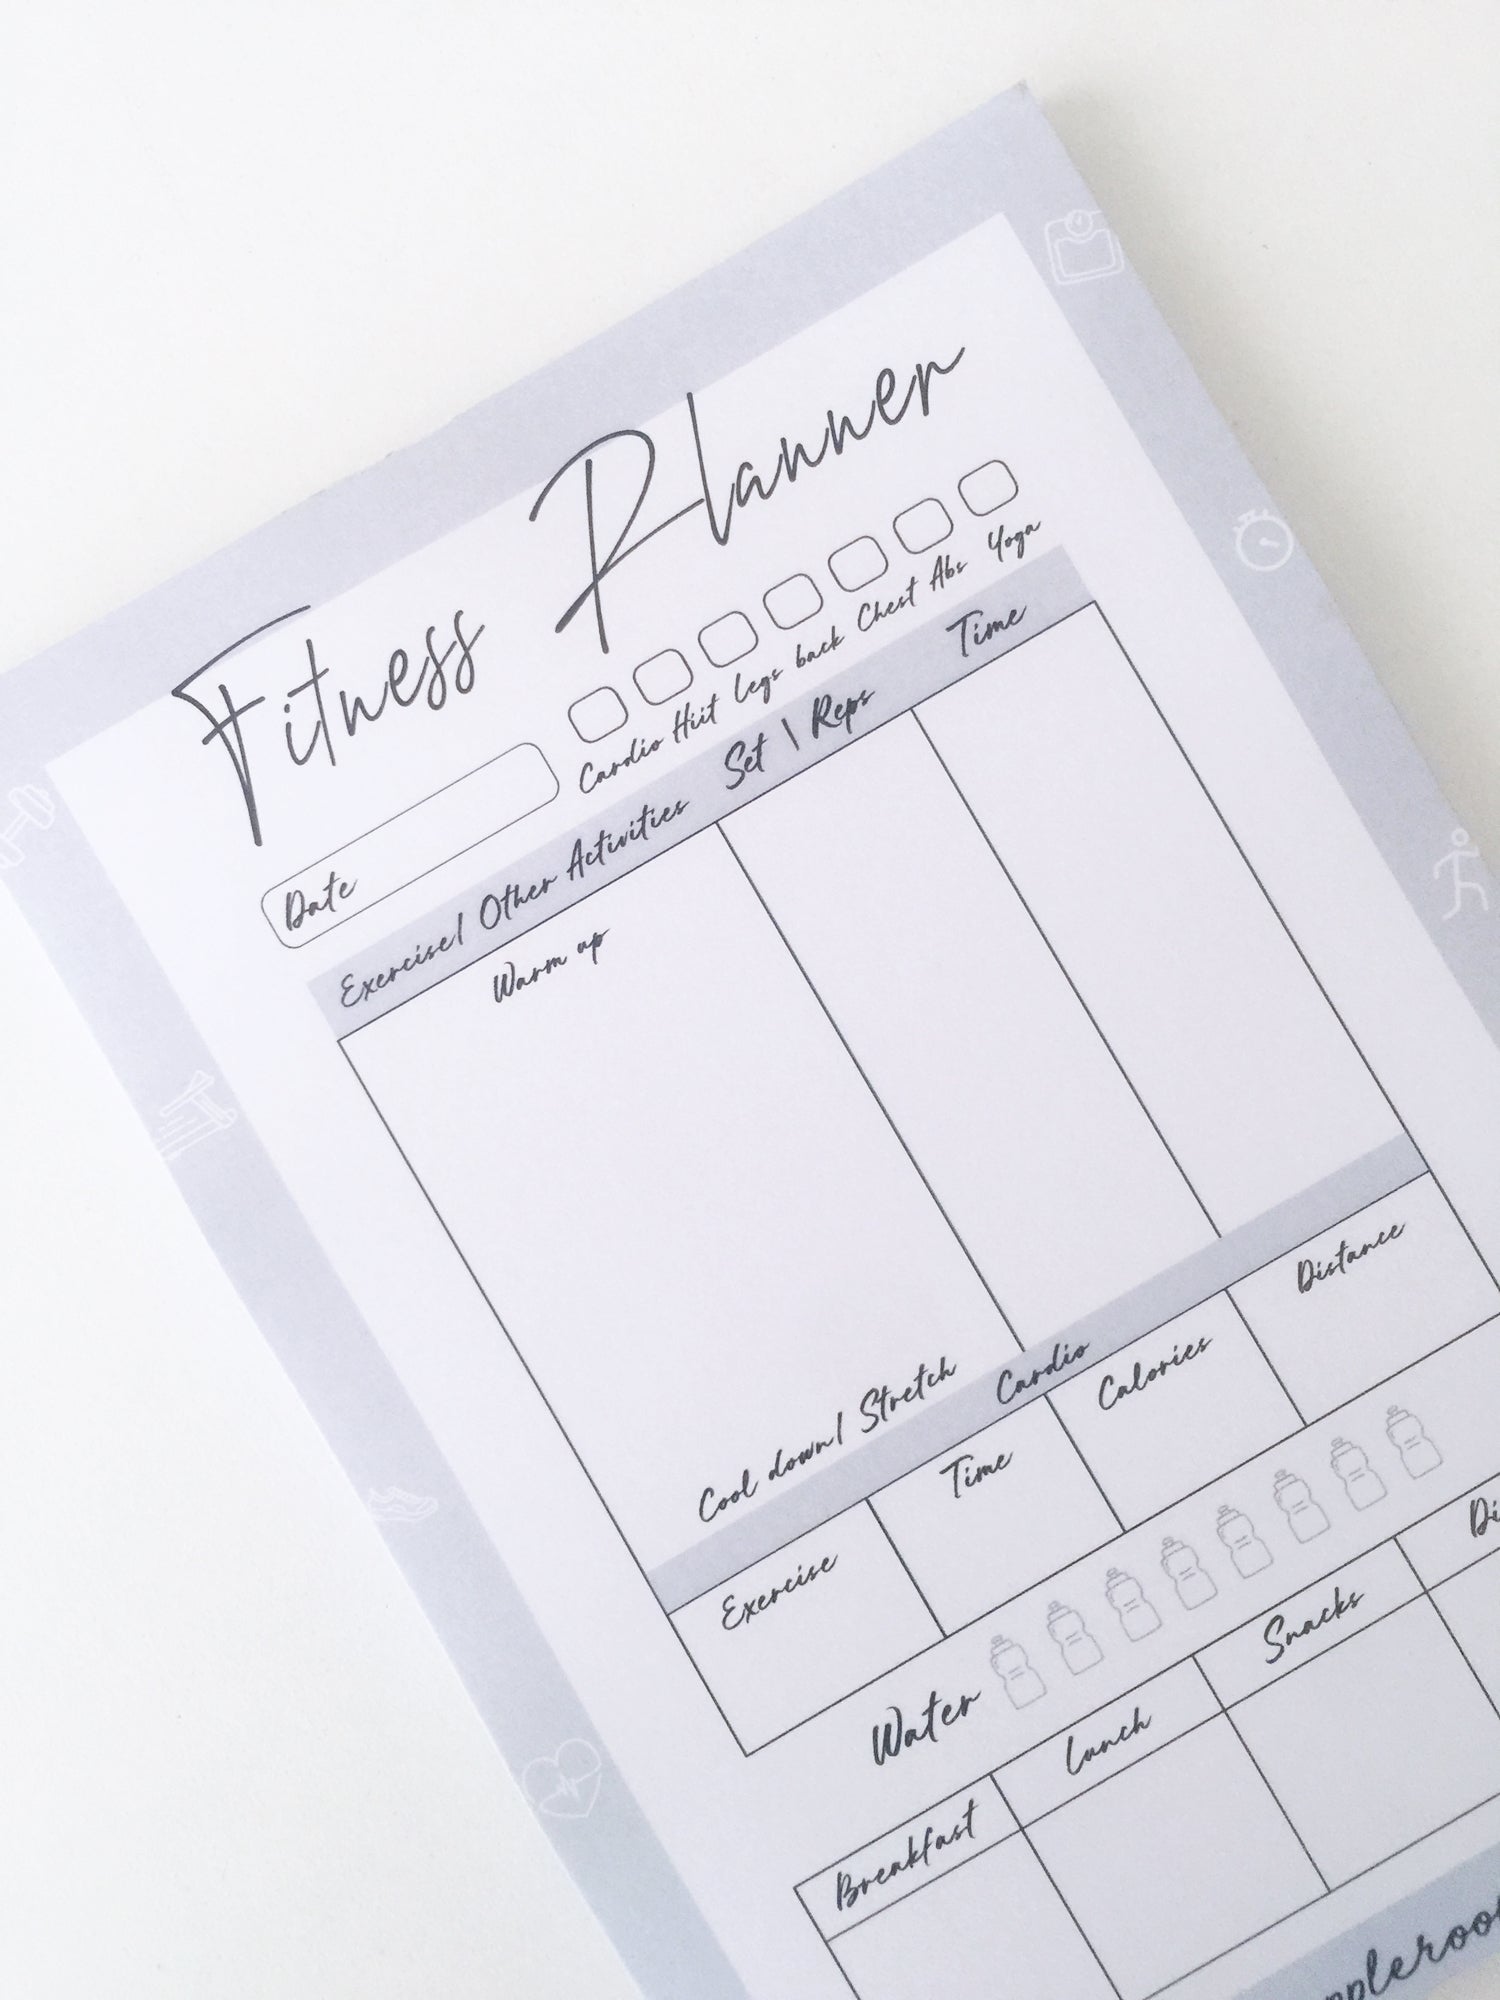 My Fitness Planner | A5 size | 50 sheets - Supple Room